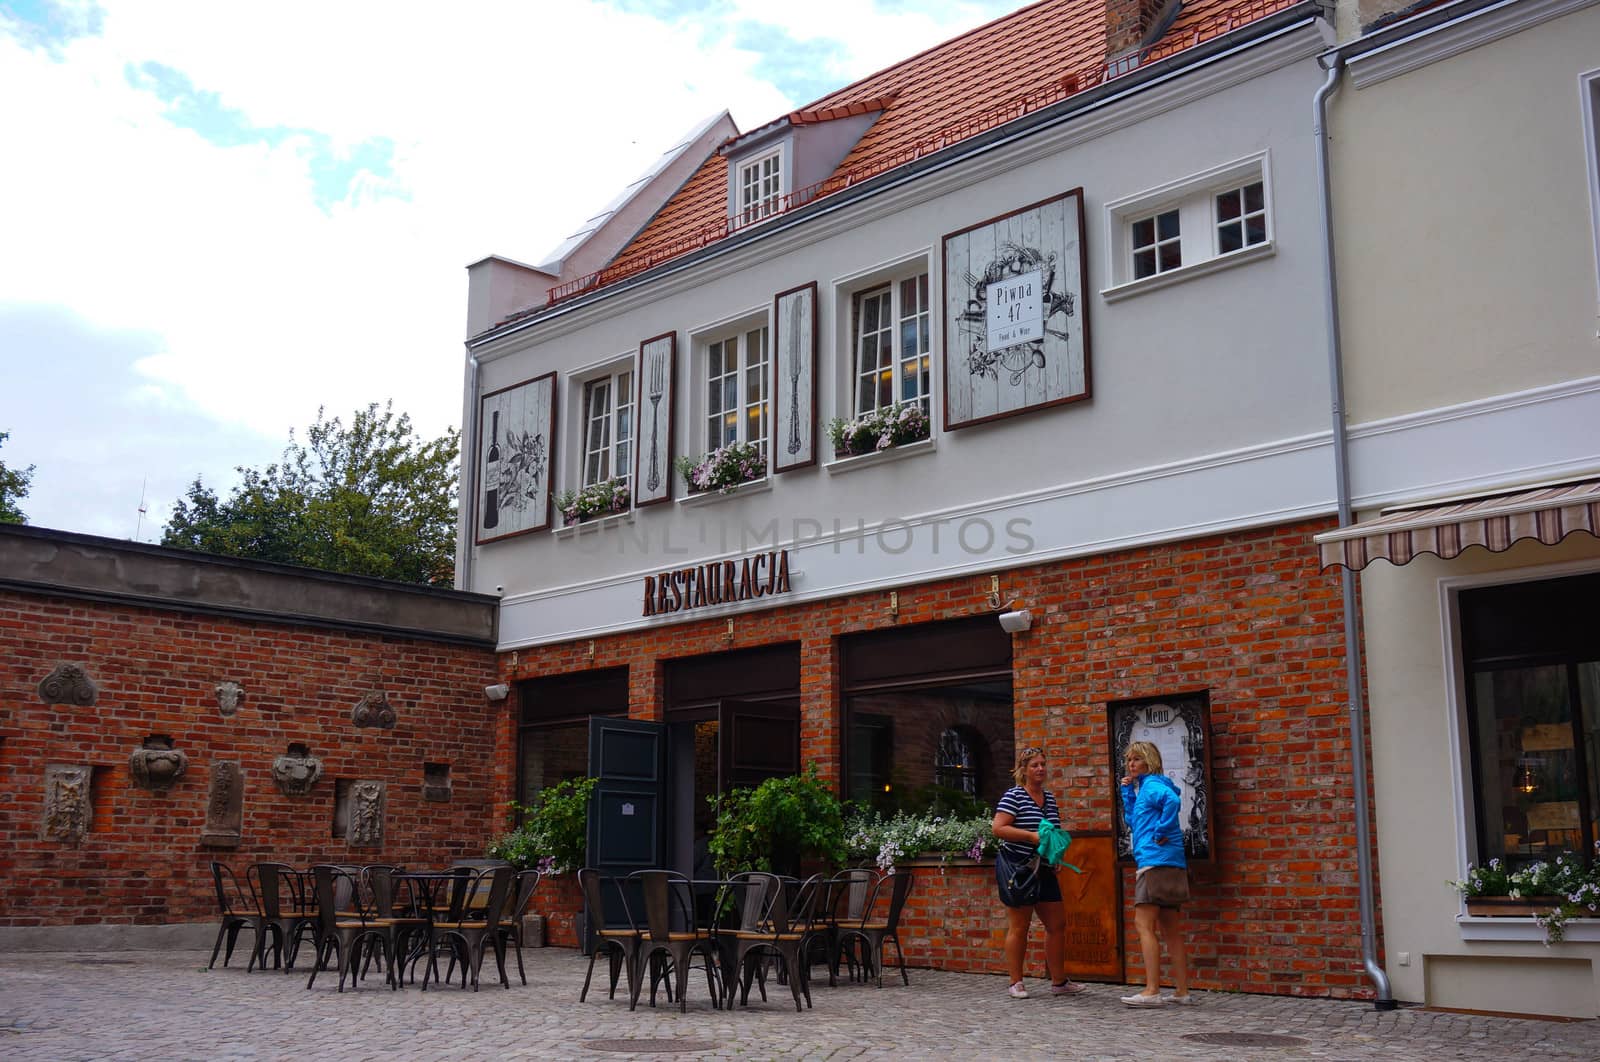 GDANSK, POLAND - JULY 29, 2015: People at a entrance of a restaurant with chairs and tables outdoors